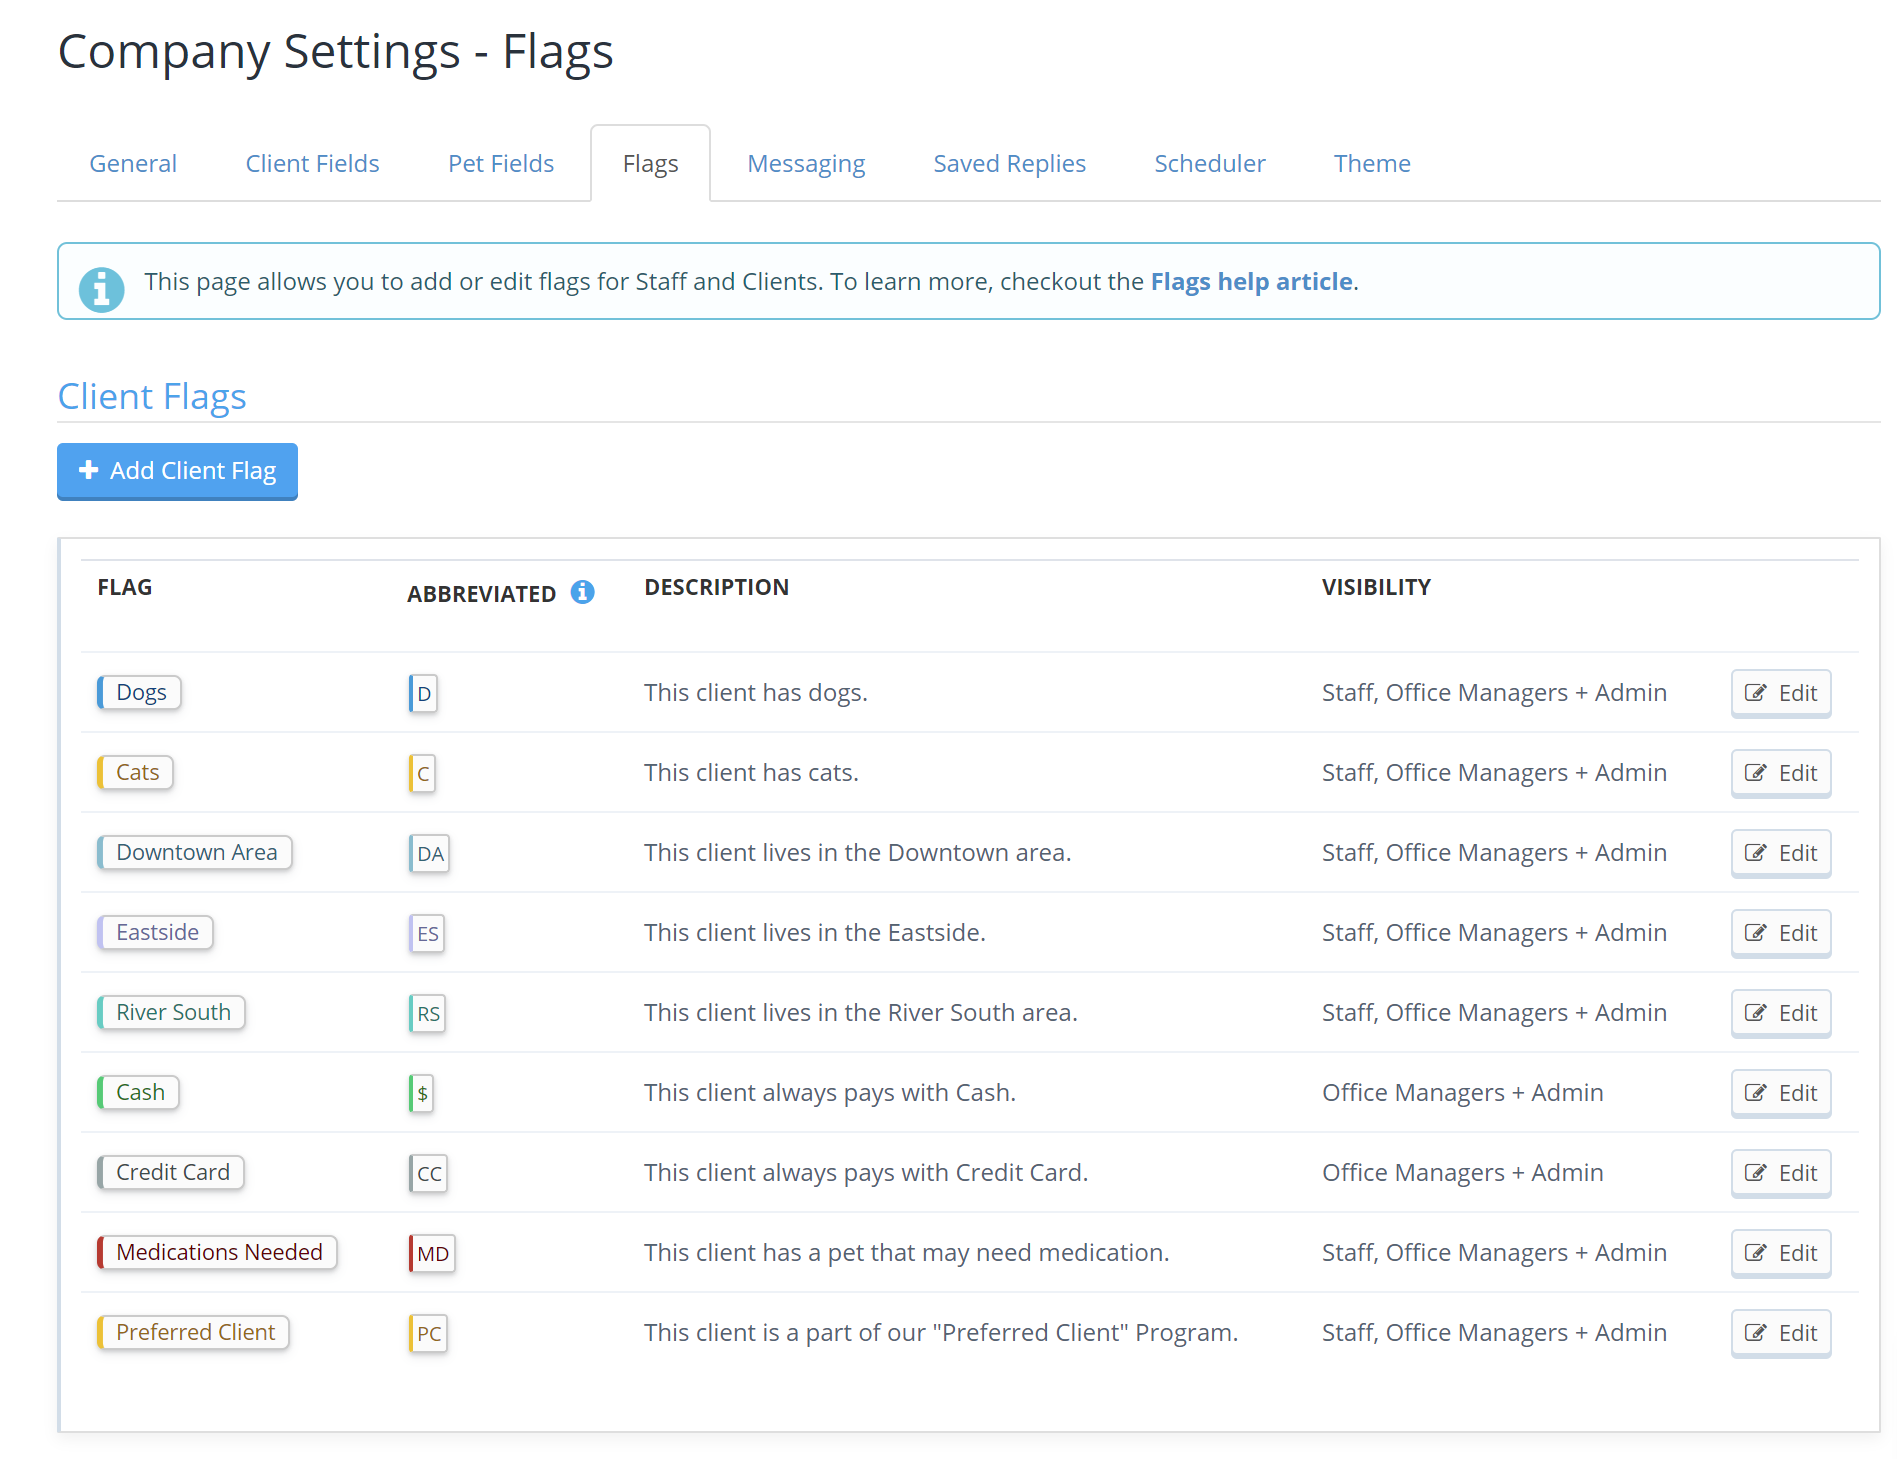 Client Flags in Company Settings